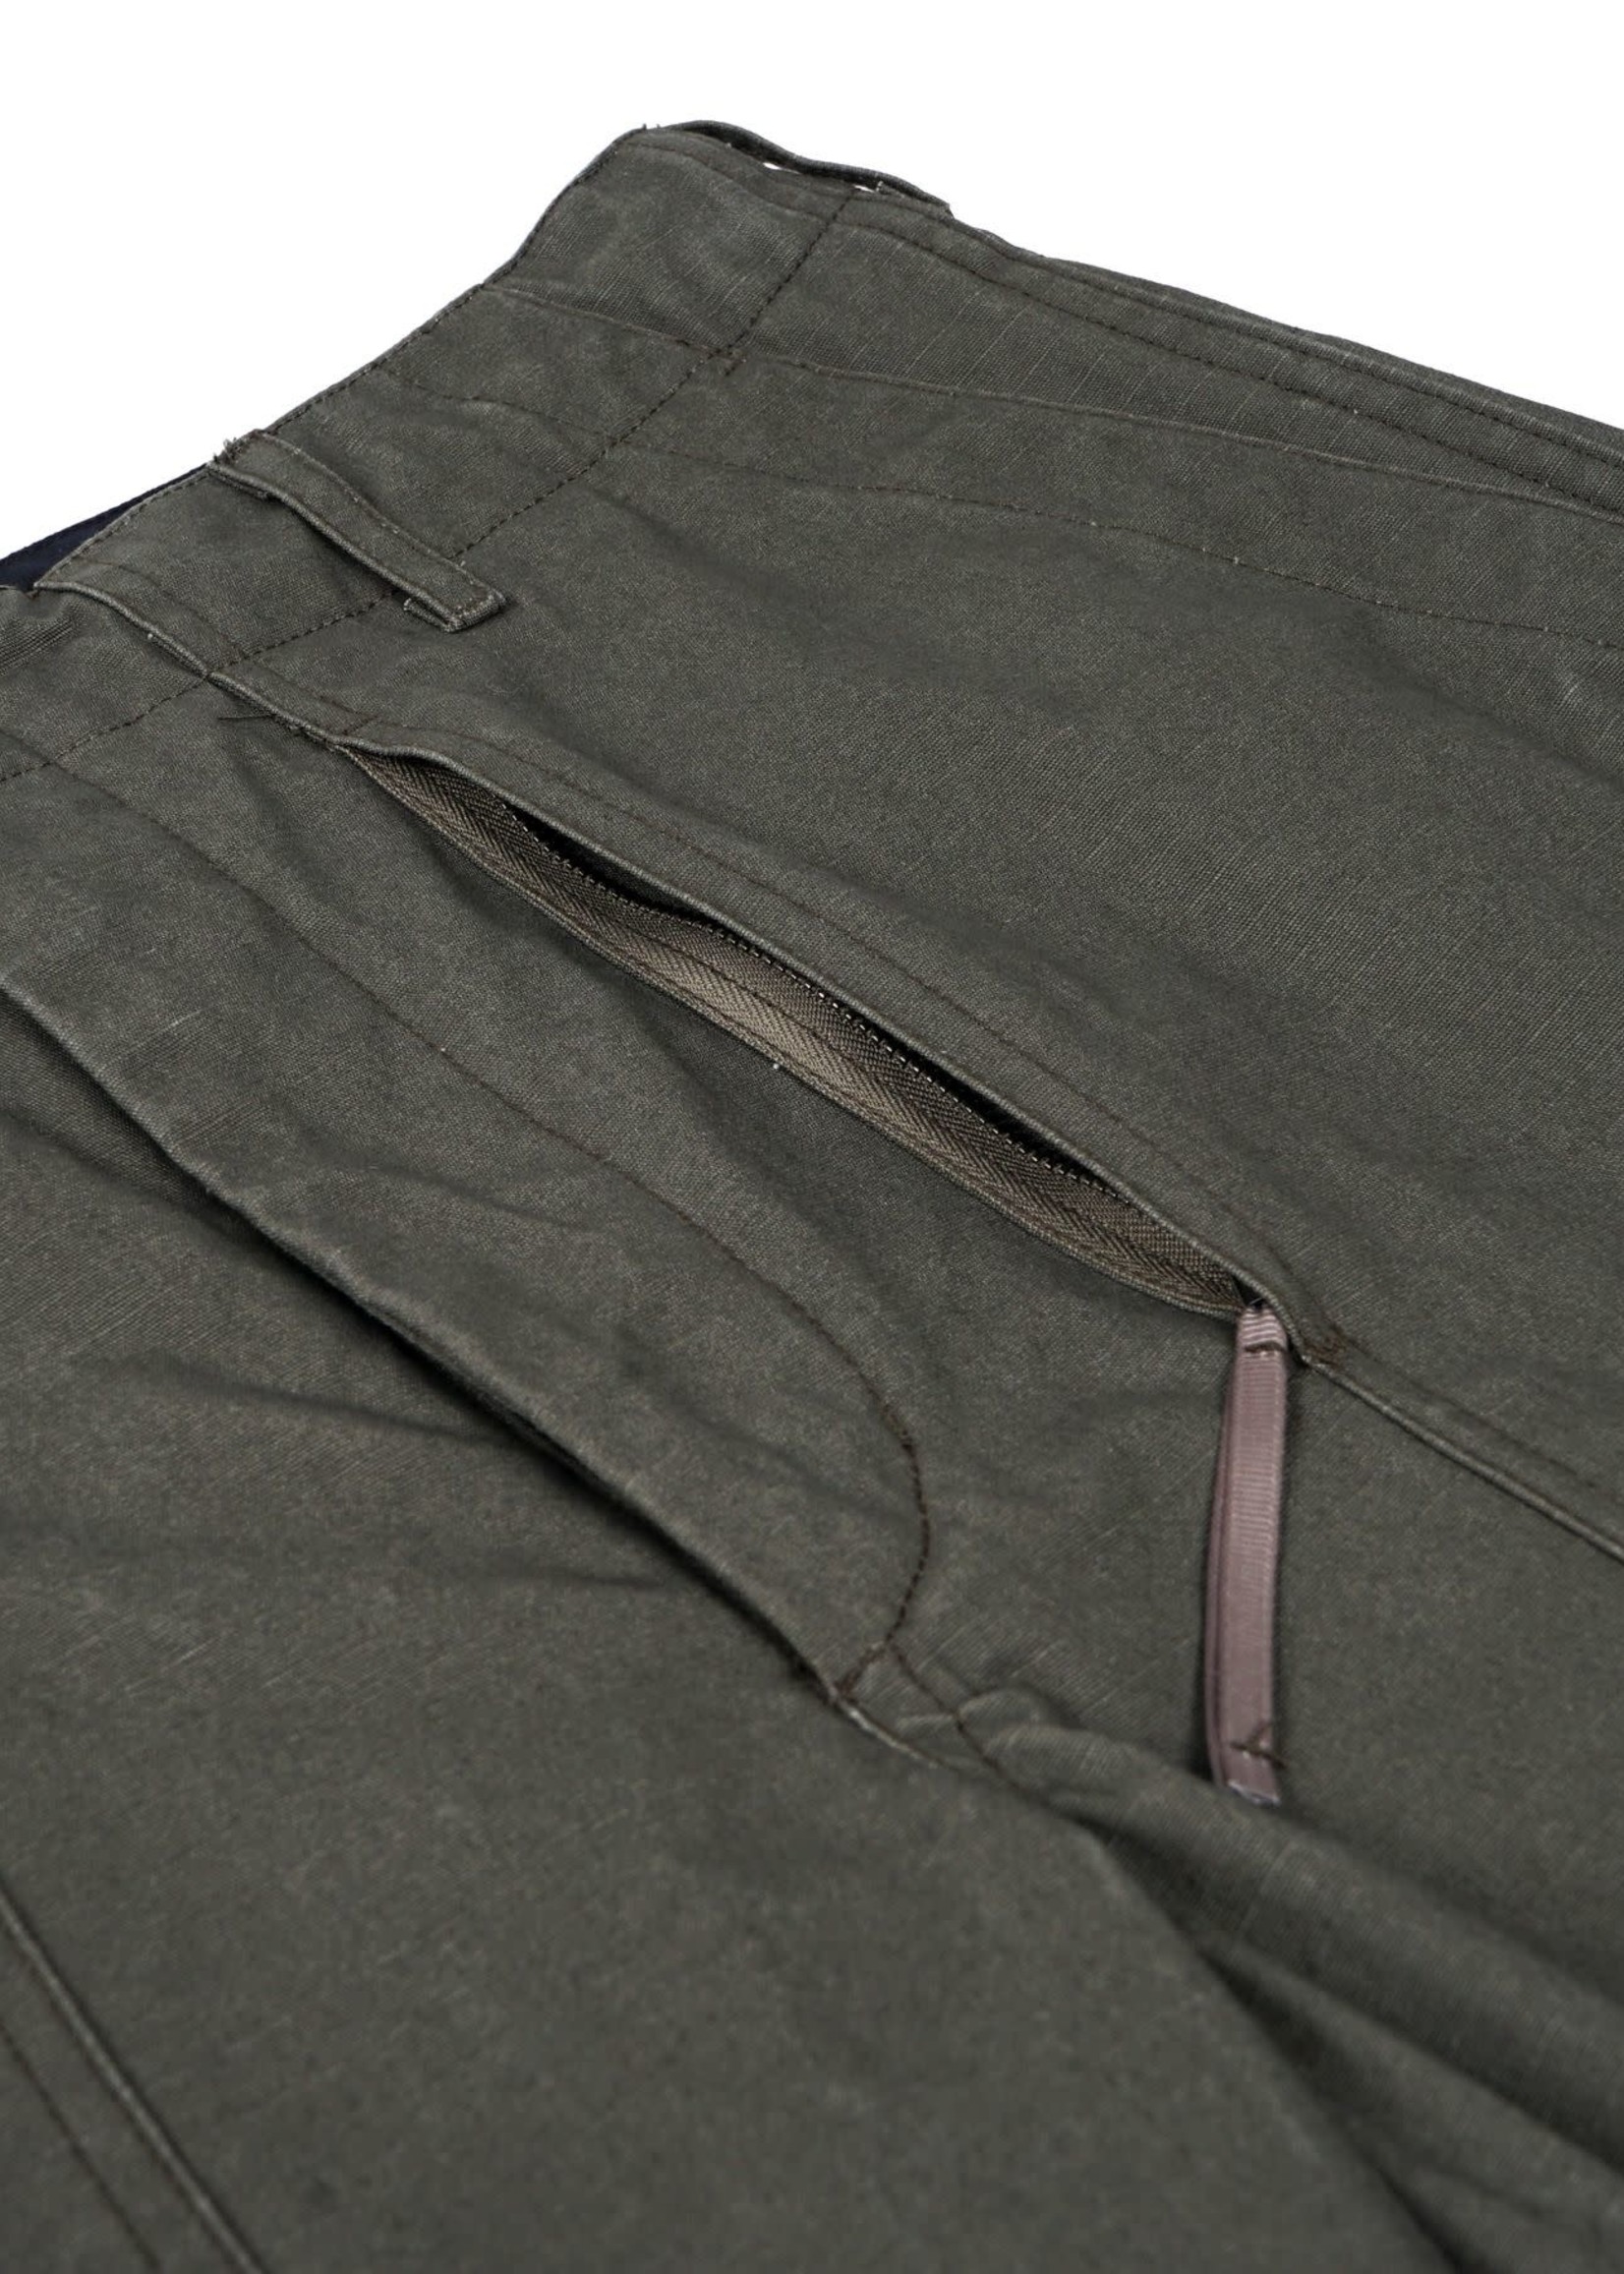 Engineered Garments Engineered Garments Fatigue Pant Olive Heavy Cotton Ripstop